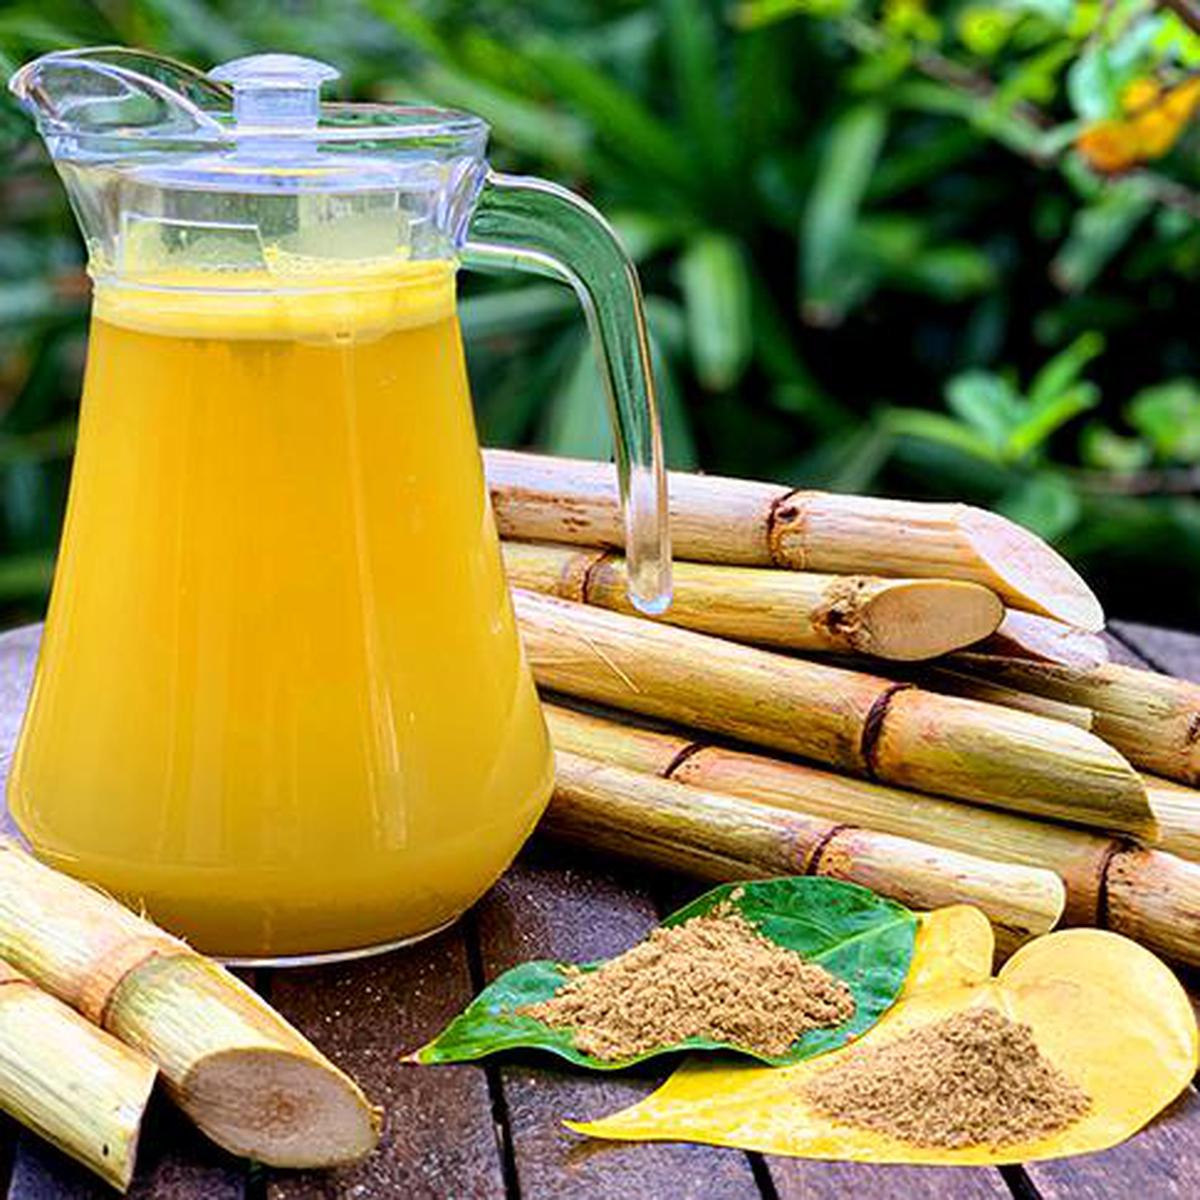 This Chennai brand offers sugarcane juice infused with betel leaves and sarsaparilla